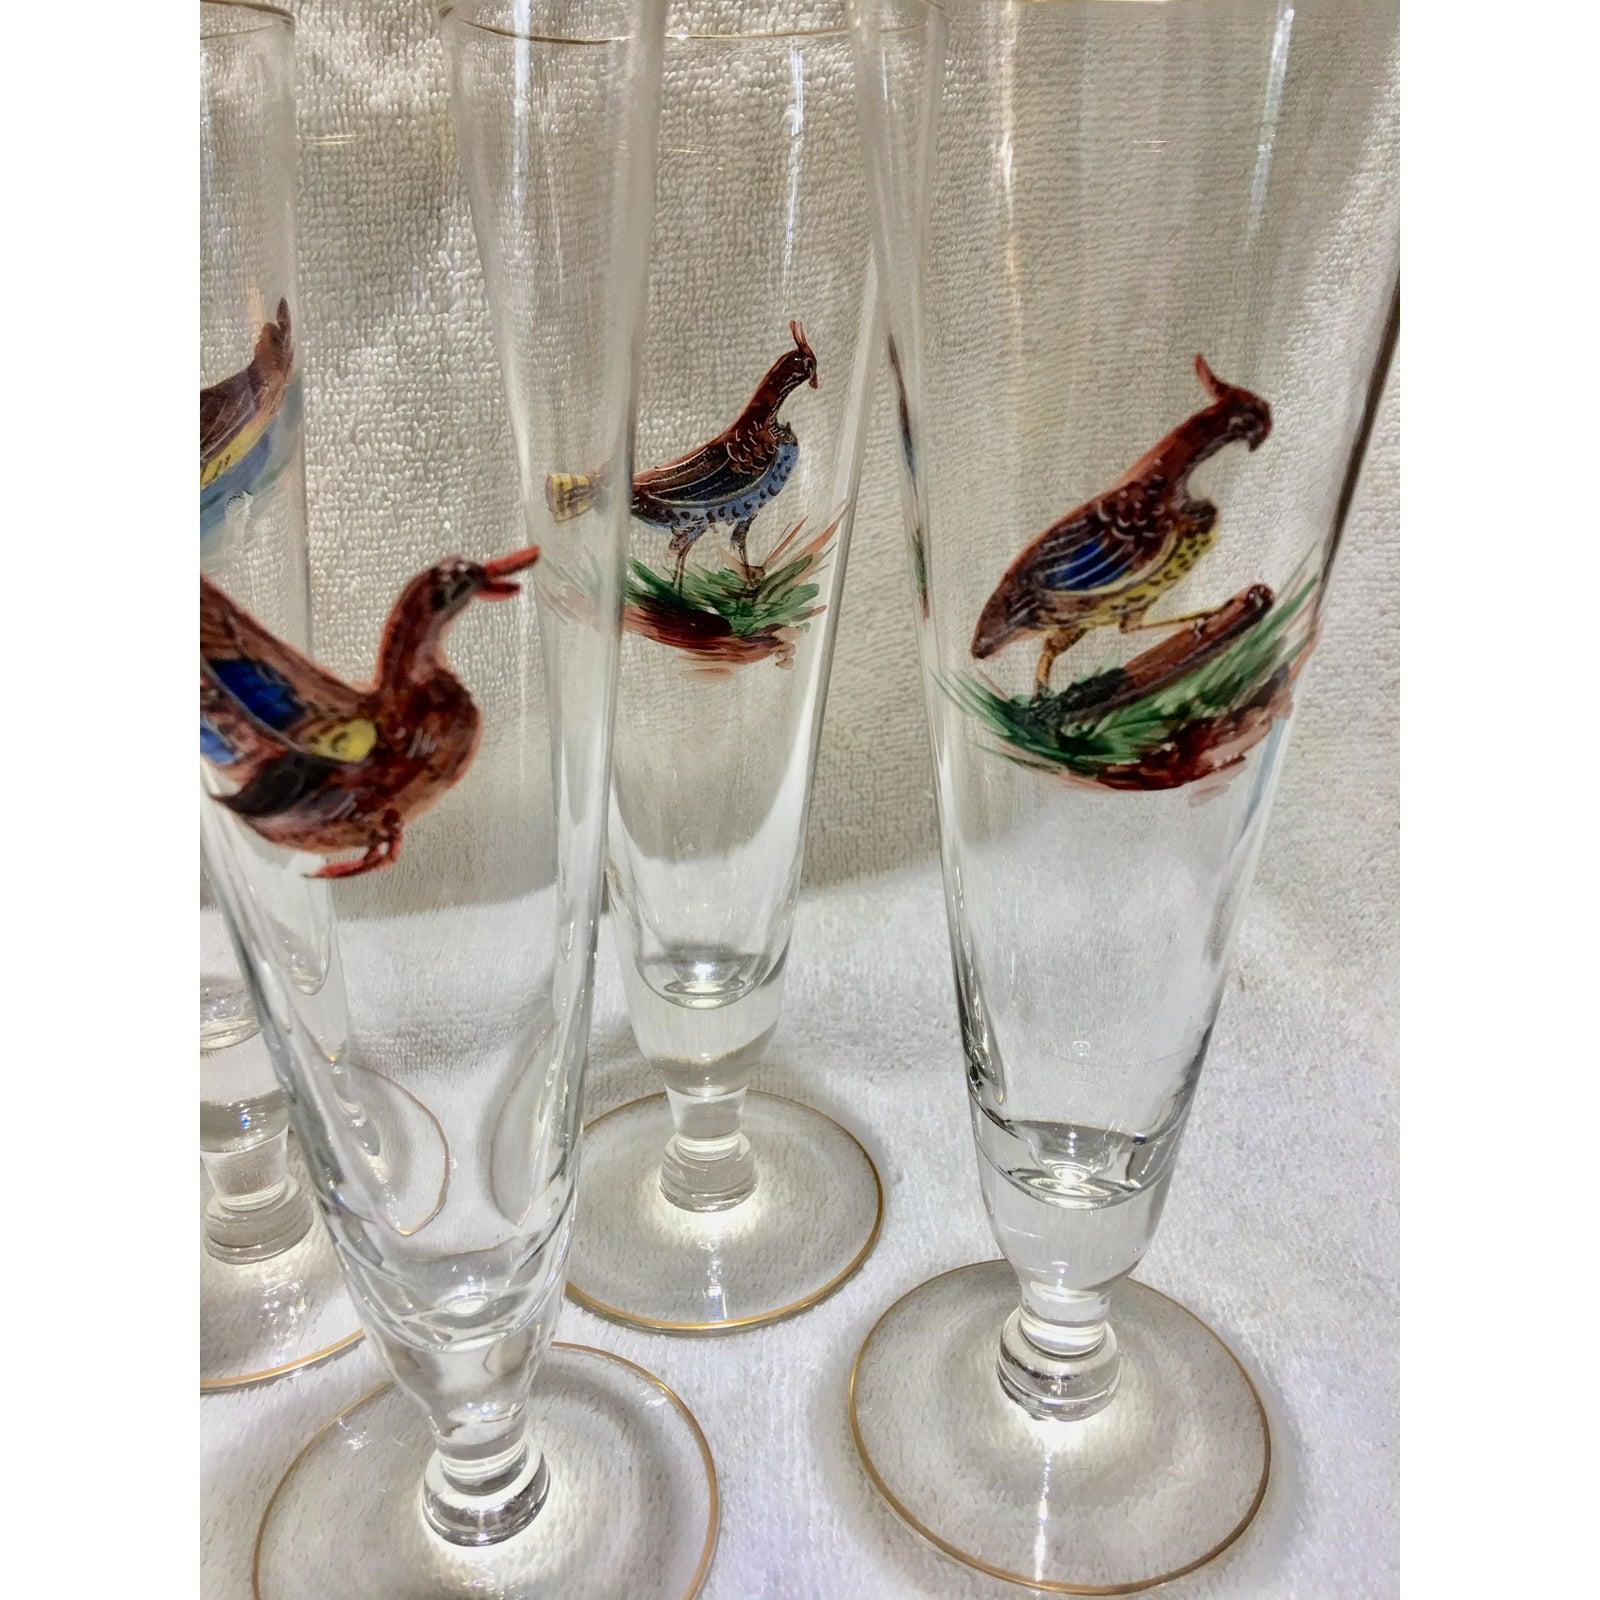 Early 20th Century Set of 8 Tall Pilsner Glasses or Champagne Flutes with Enameled Birds